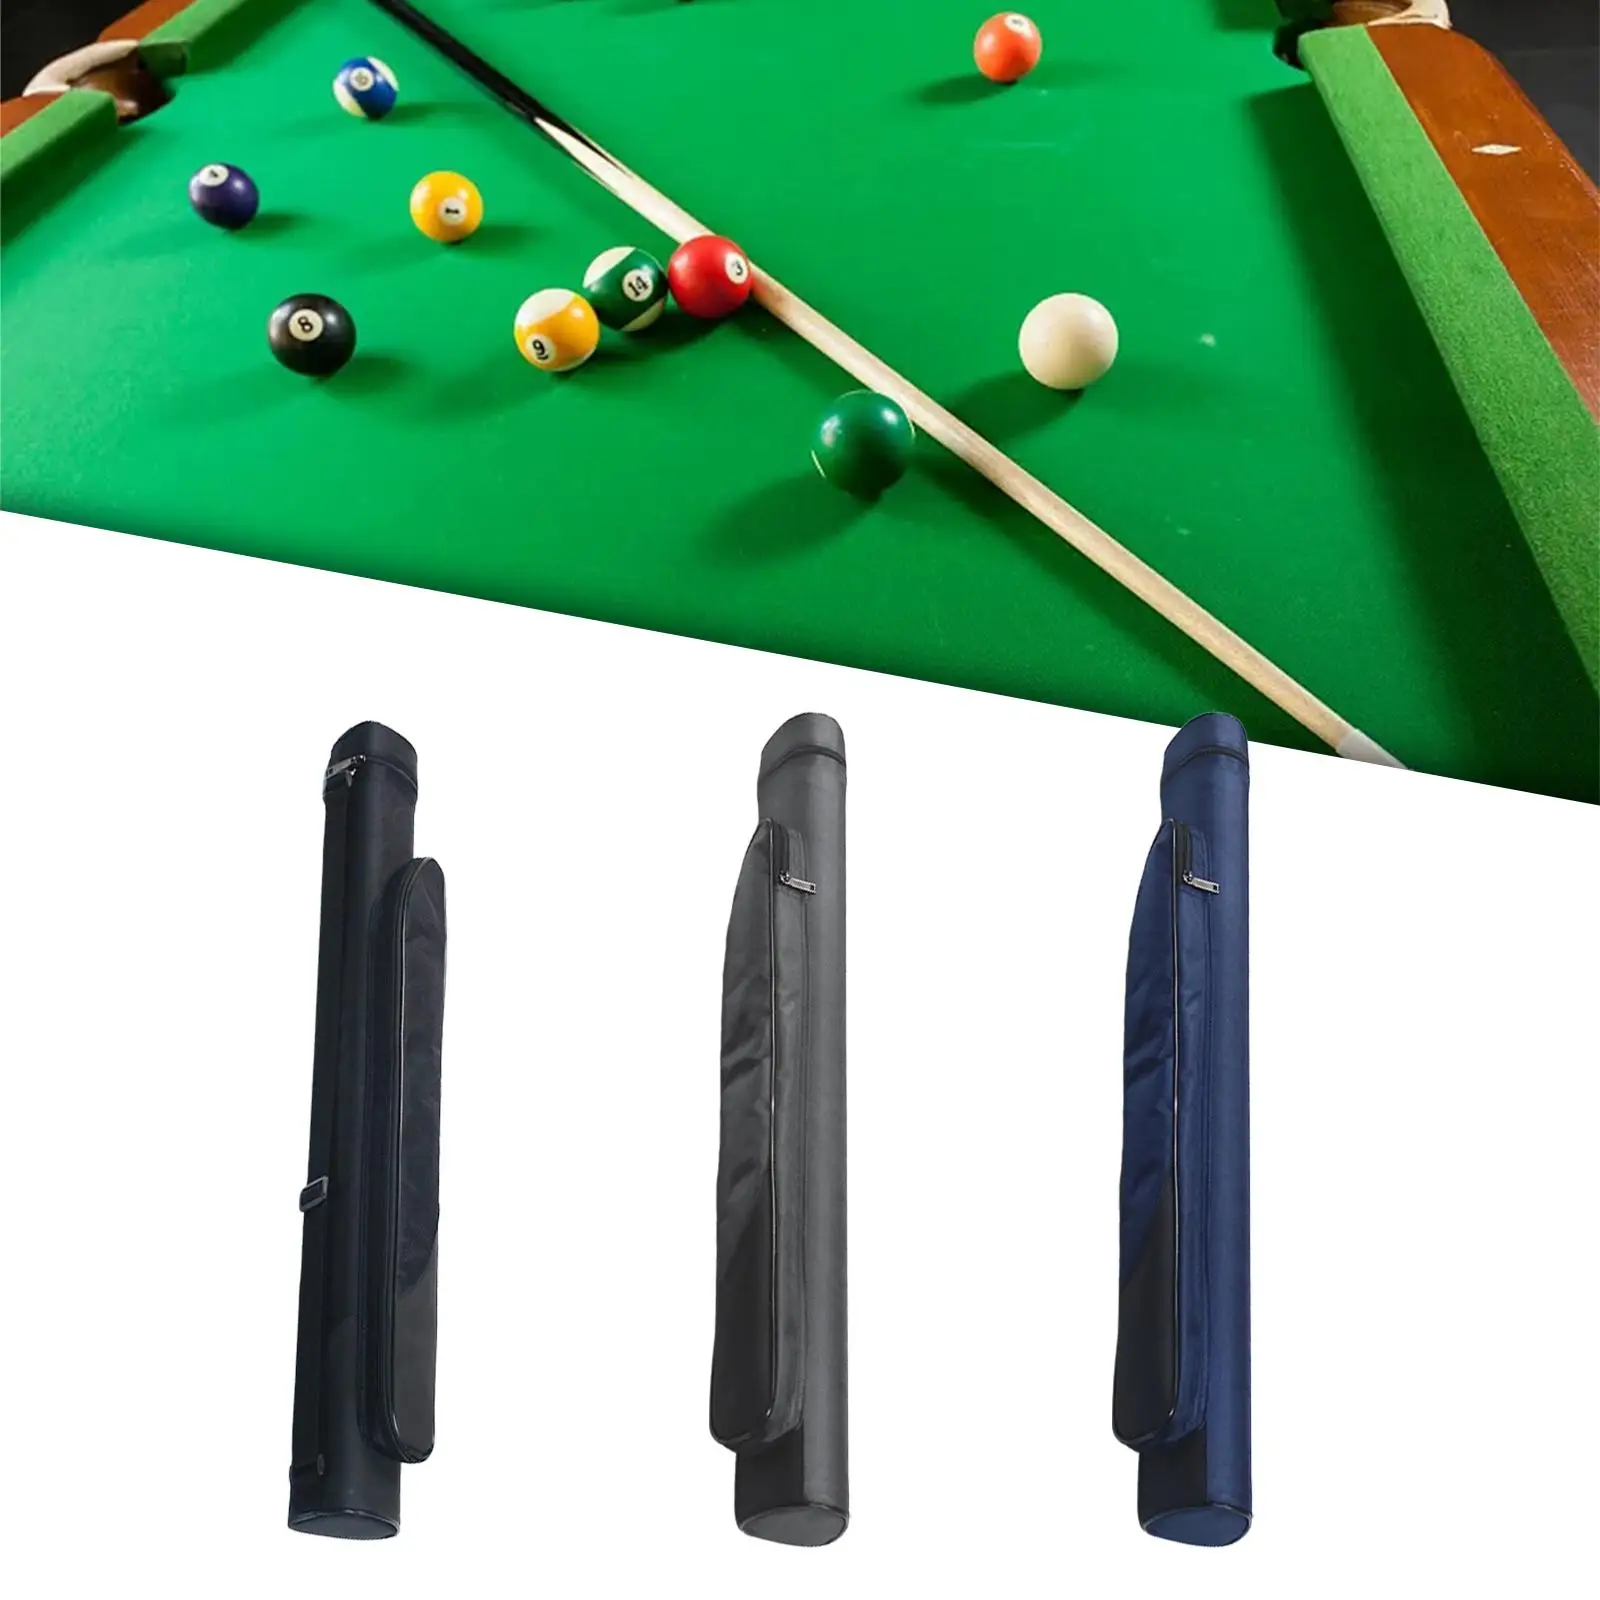 Billiard Pool Cue Stick Carrying Bag Durable Pool Table Accessories with Shoulder Strap 4 Holes Pool Cue Cases Pool Cue Carrier